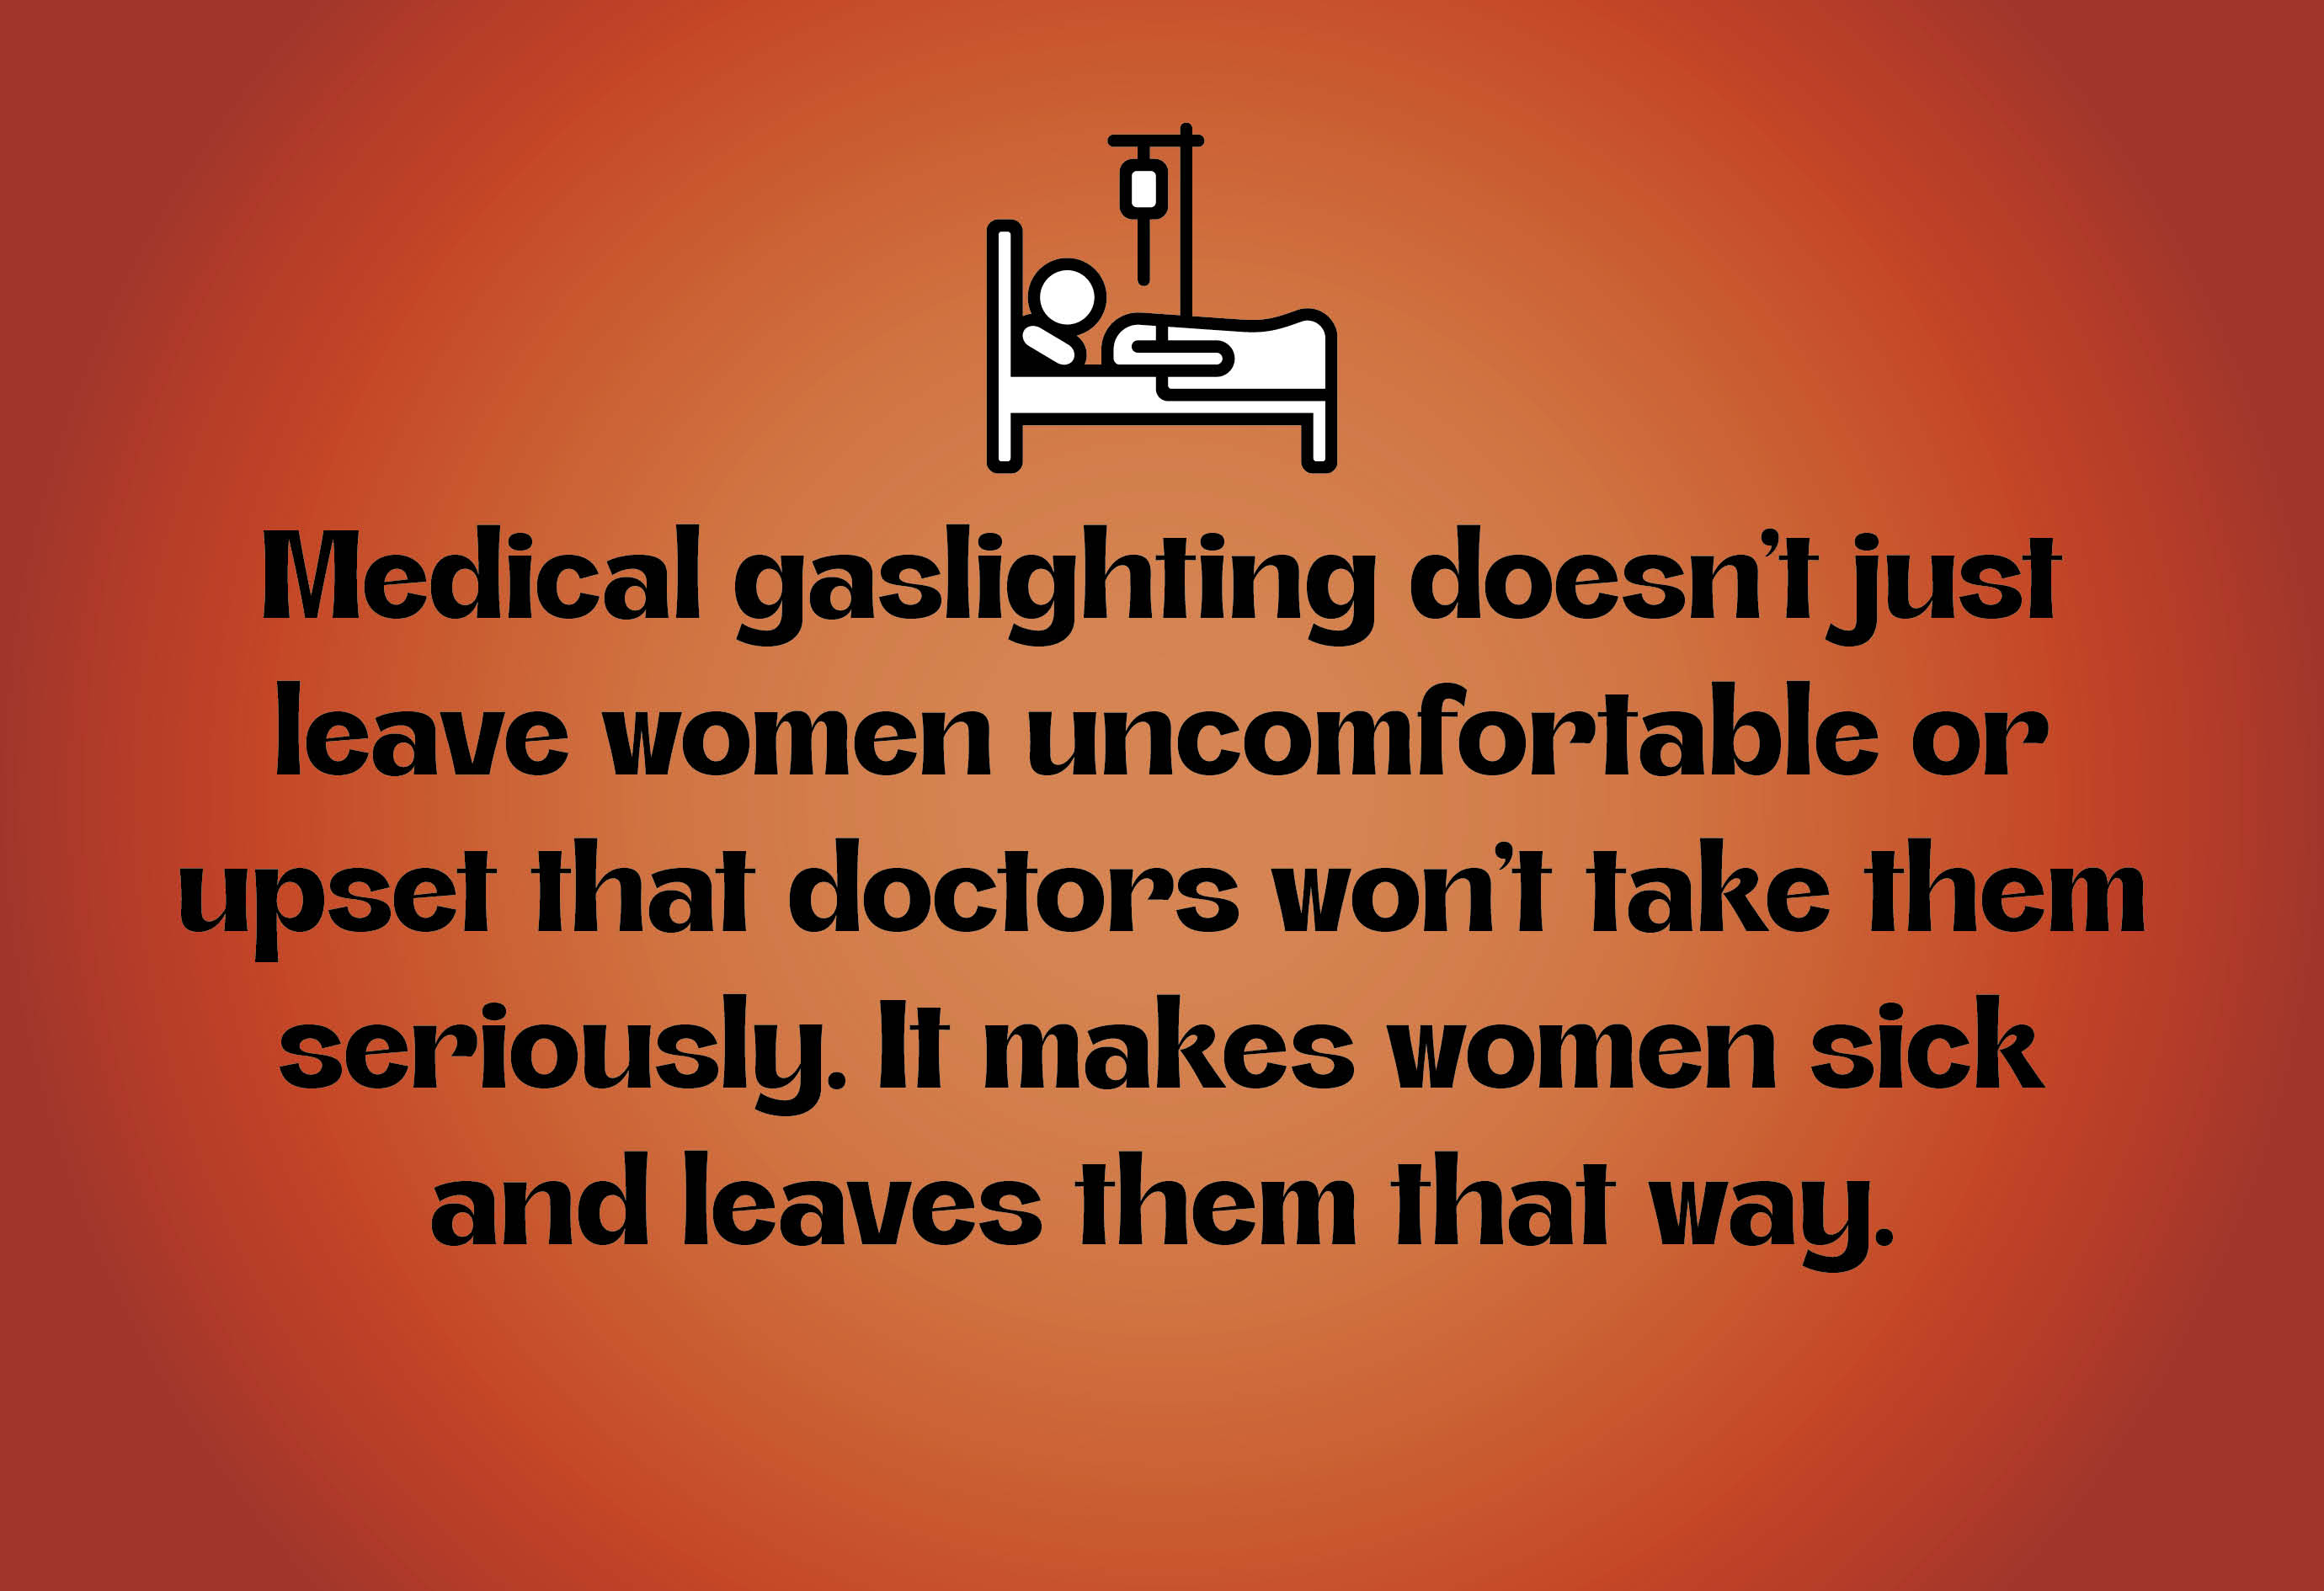 “Medical gaslighting doesn’t just leave women uncomfortable or upset that doctors won’t take them seriously. It makes women sick and leaves them that way.”